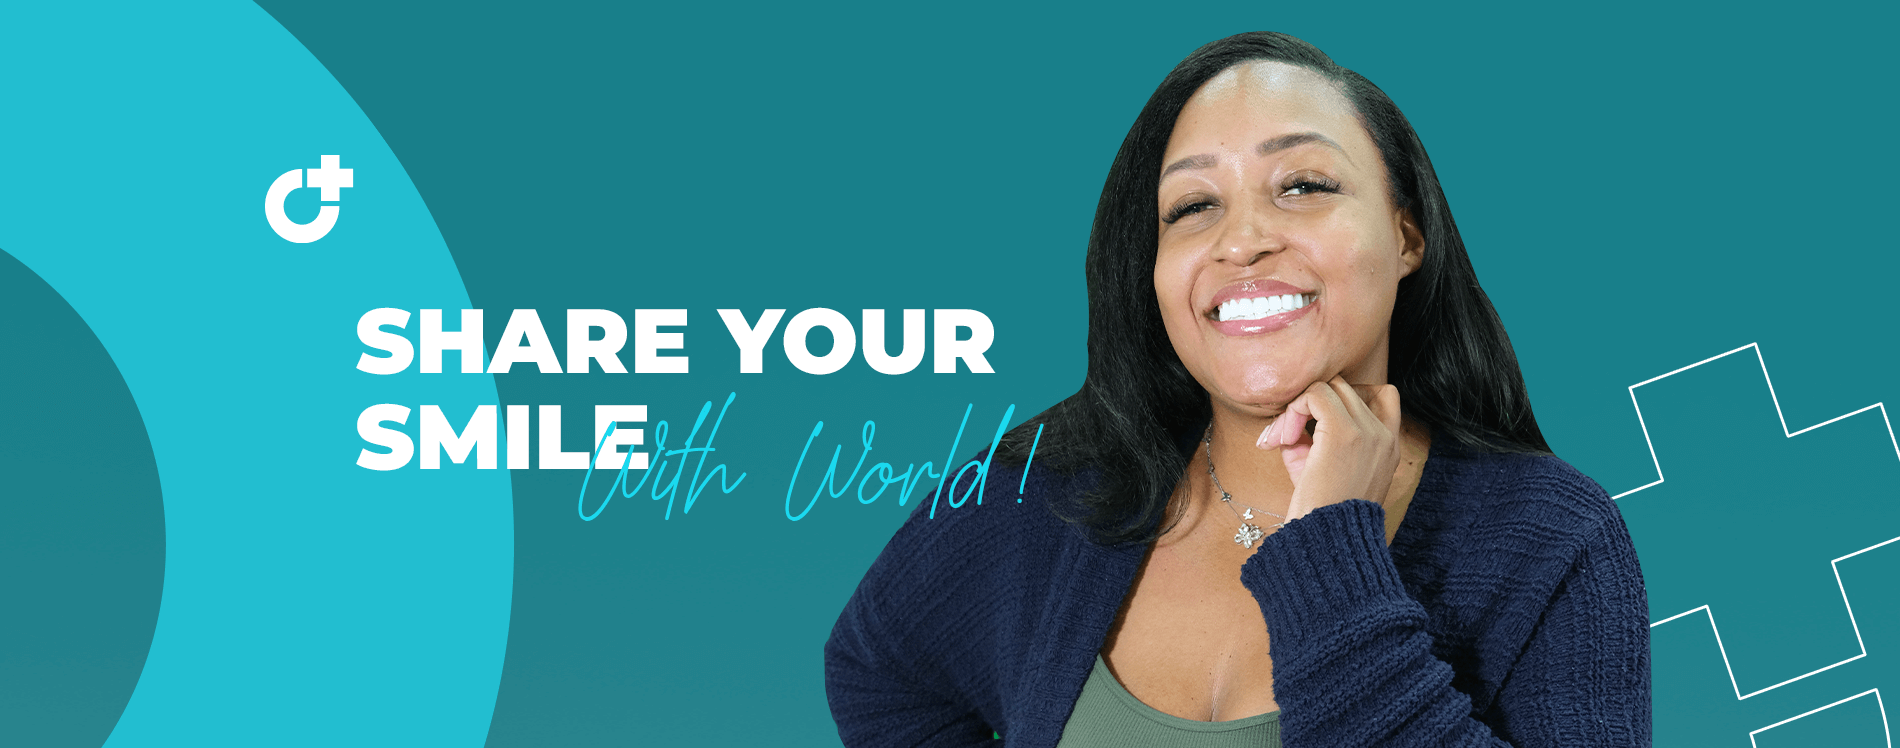 Share Your Smile With World! 